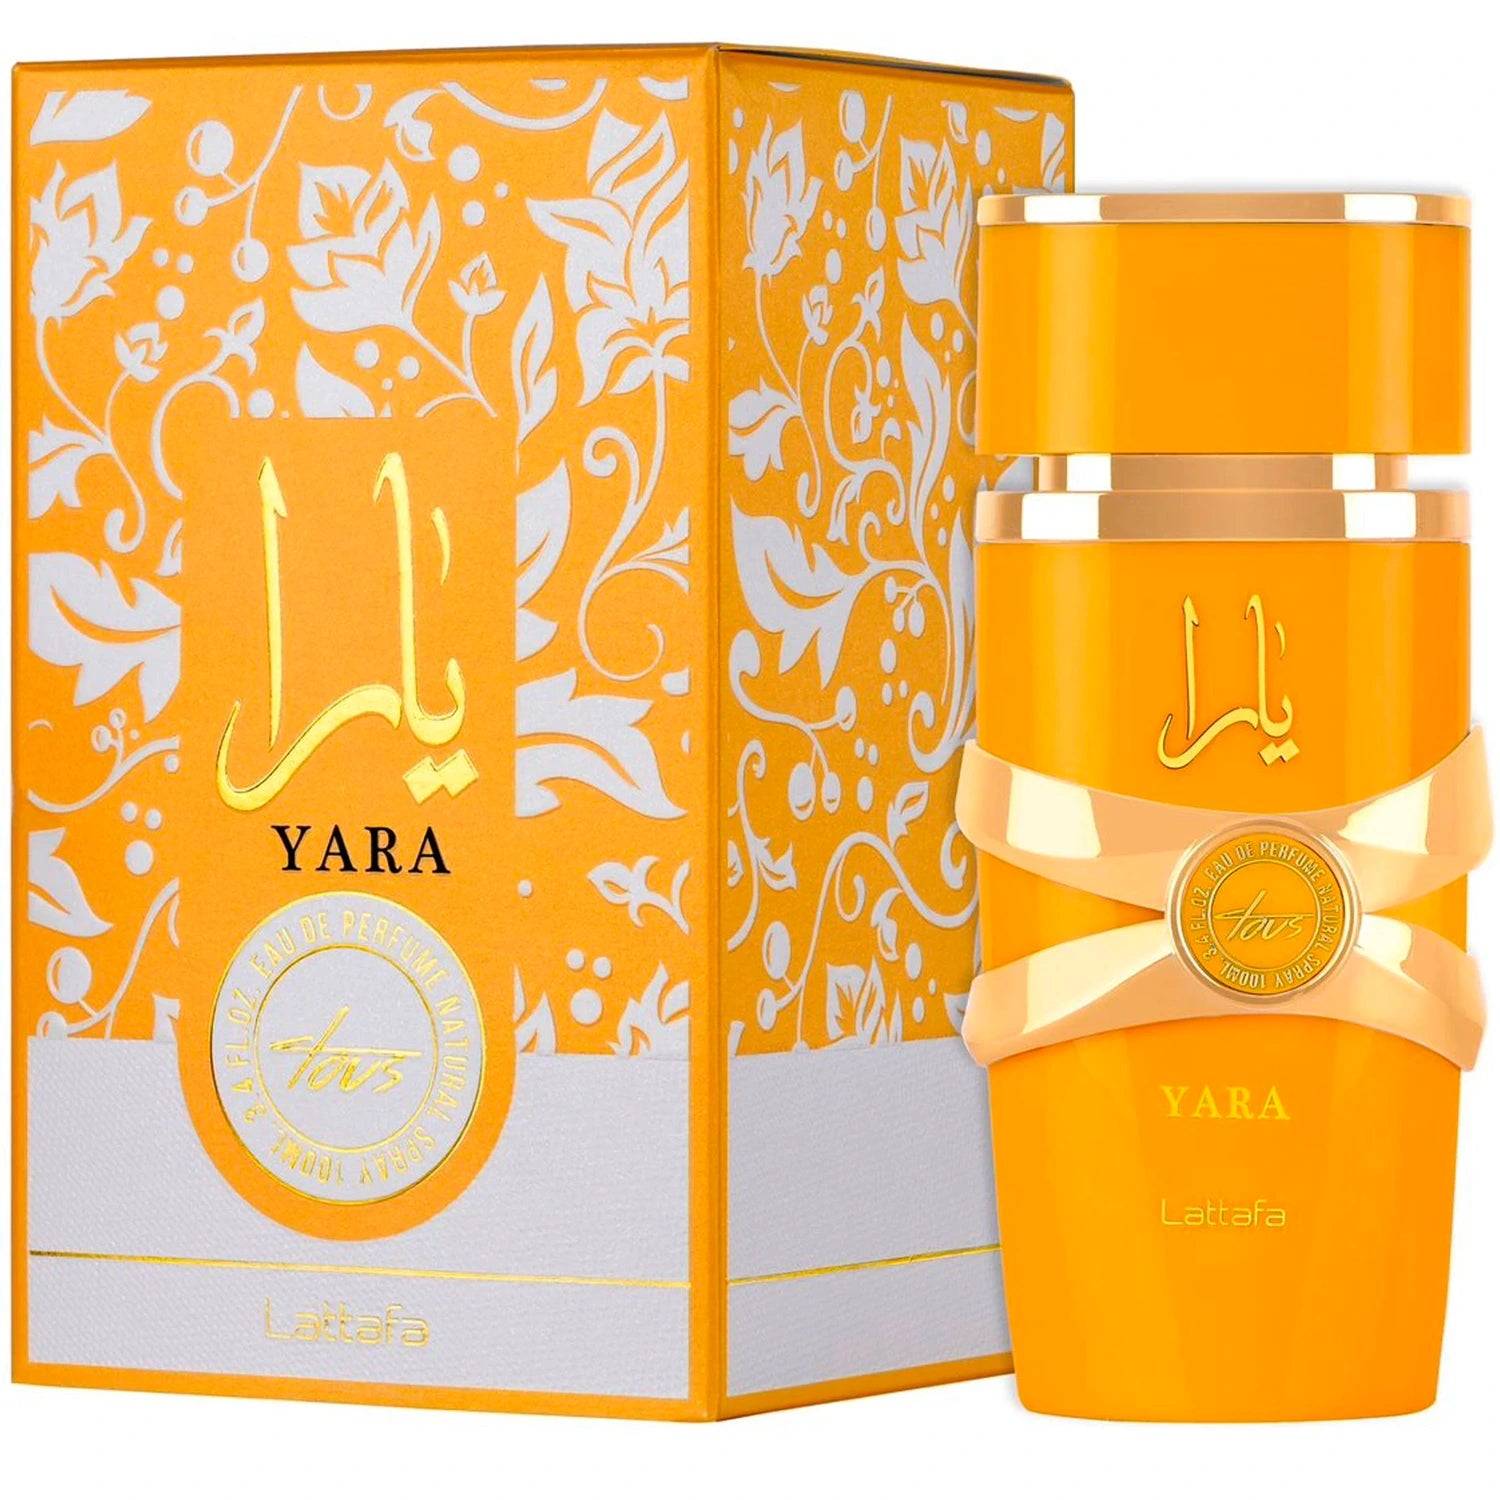 <p data-mce-fragment="1"><em>﻿INSPIRED BY</em><strong>﻿ PACO RABANNE FAME</strong></p>
<p data-mce-fragment="1">Introduced in 2023. Yara Tous by Lattafa Perfumes offers a luxurious scent, blending exotic top notes of mango, coconut, and passionfruit with heart notes of jasmine, heliotrope, and orange blossom, rounded off with a warm and inviting base of vanilla, musk, and cashmeran. Experience sophistication and elegance with Yara Tous, the ultimate fragrance for women. </p>